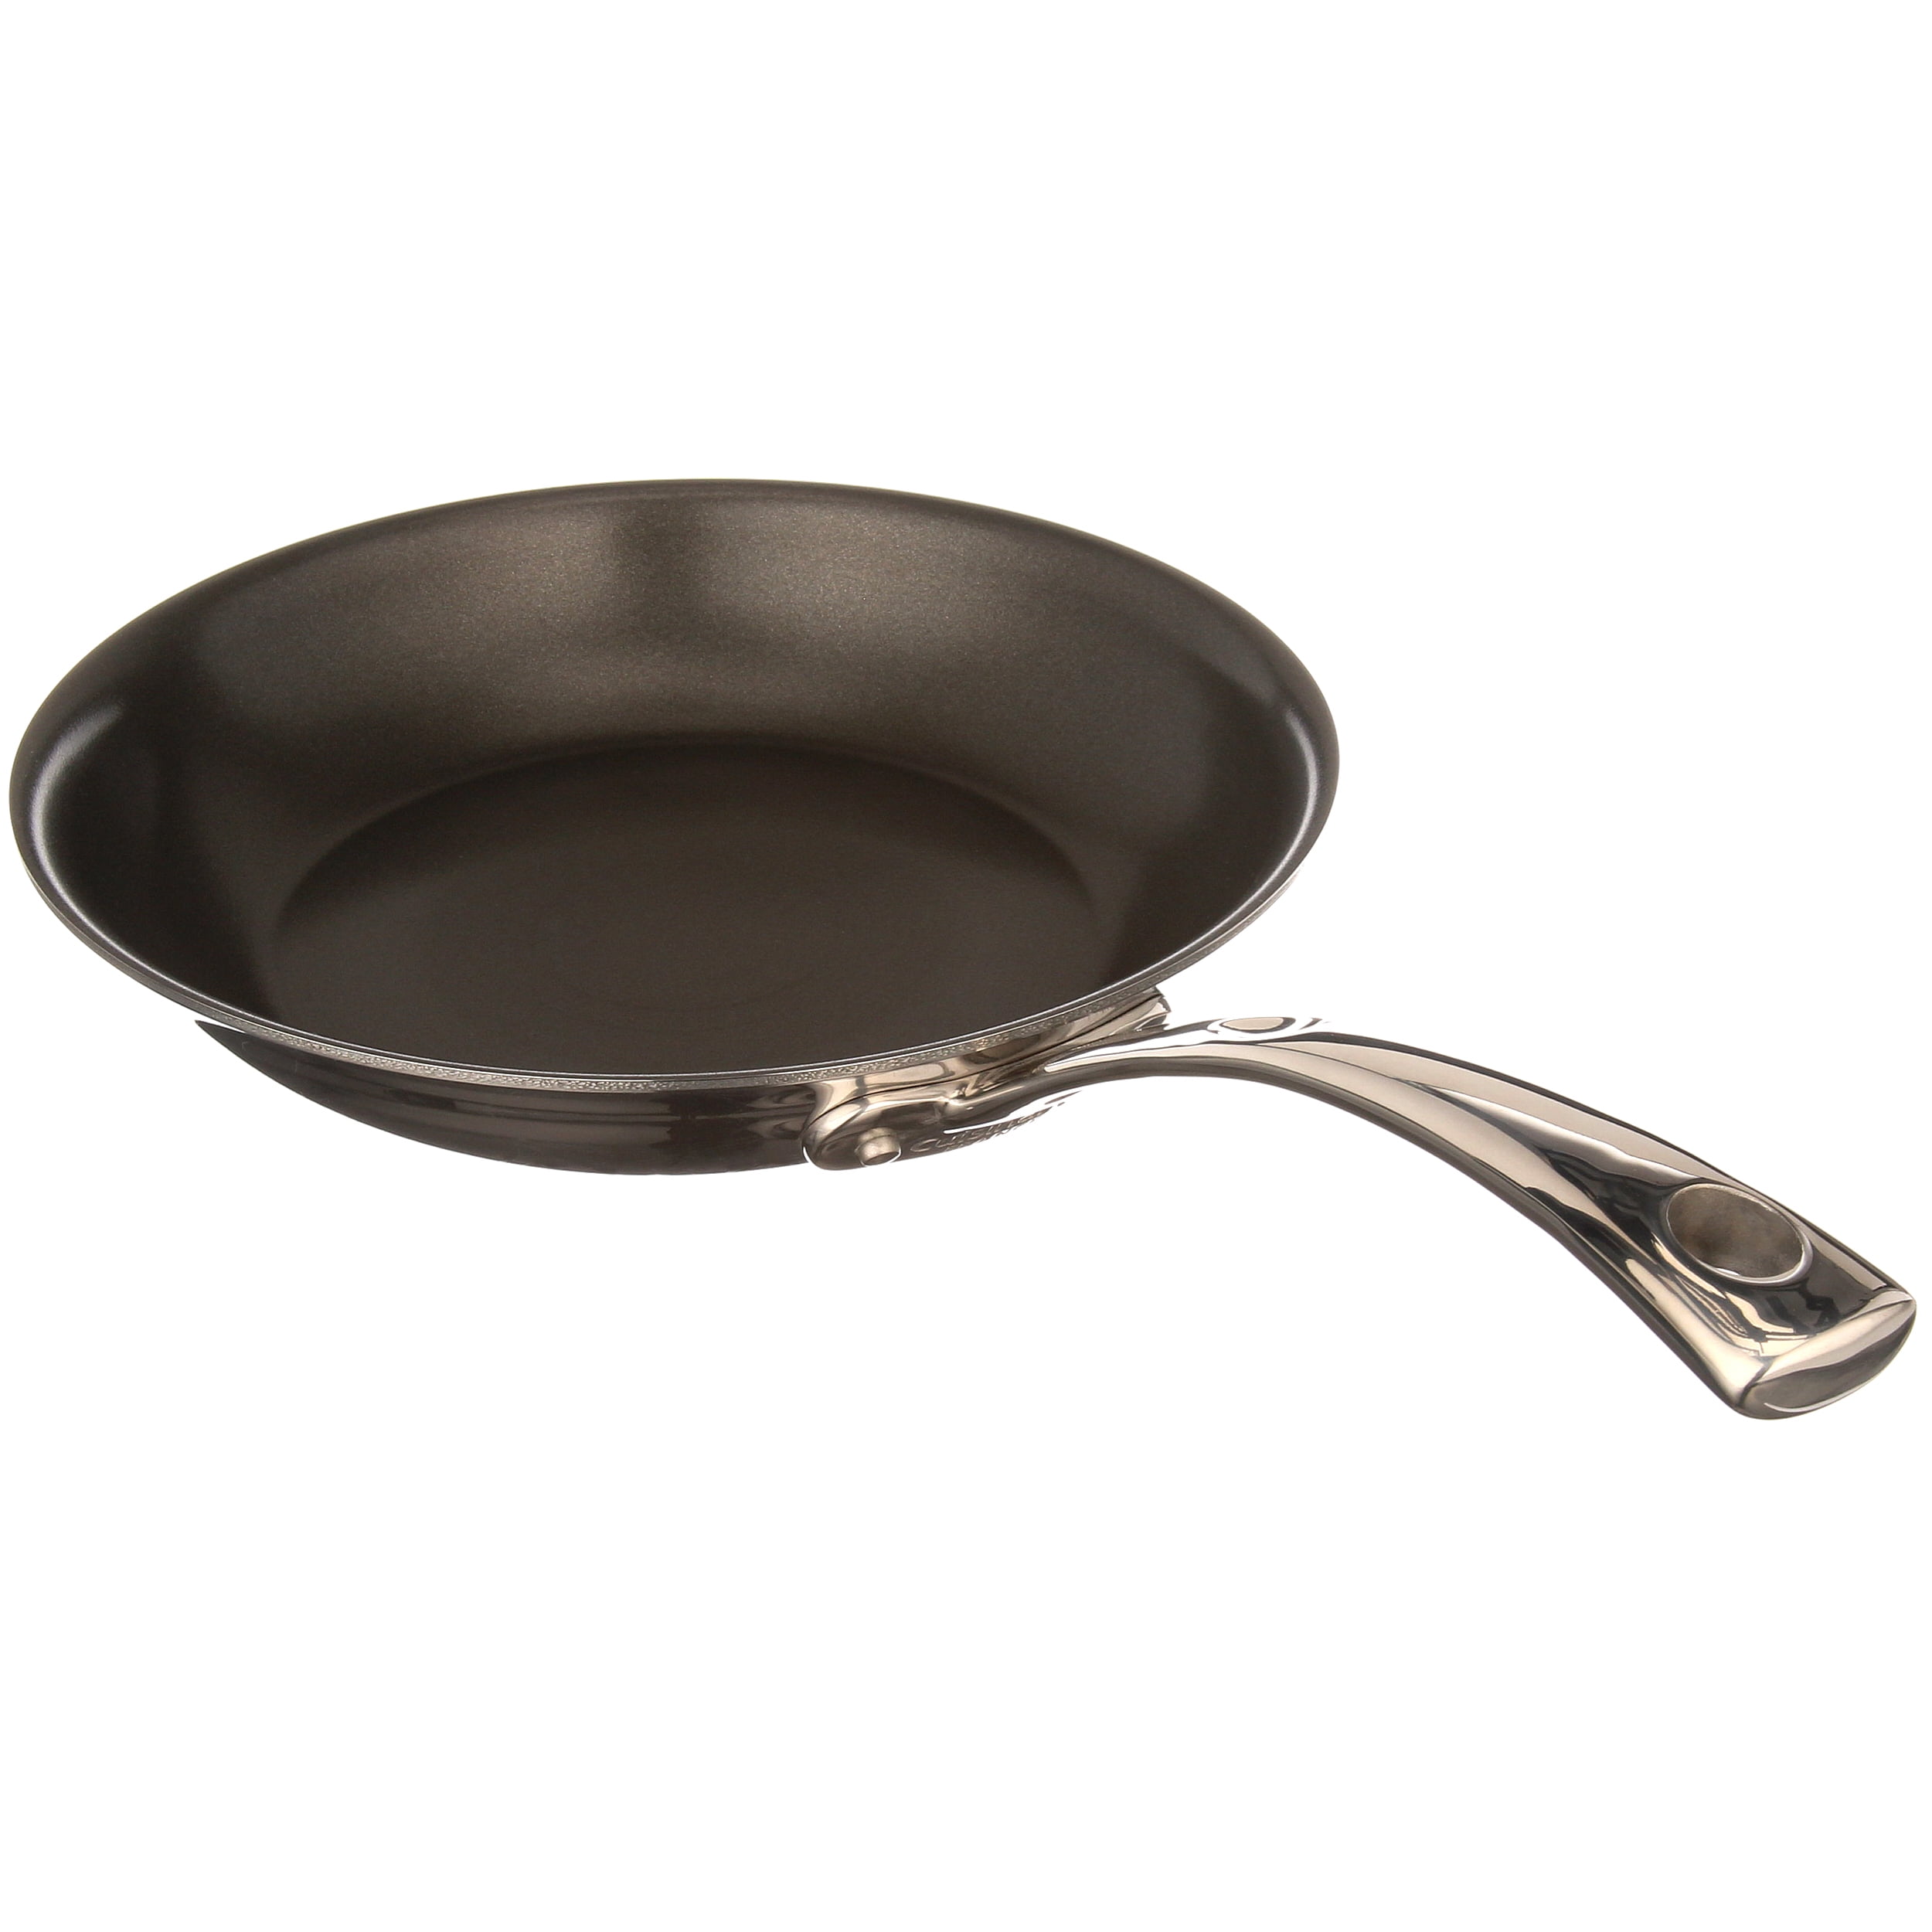 Cuisinart French Classic Tri-Ply Stainless Steel French Skillet 10 inch / Stainless Steel